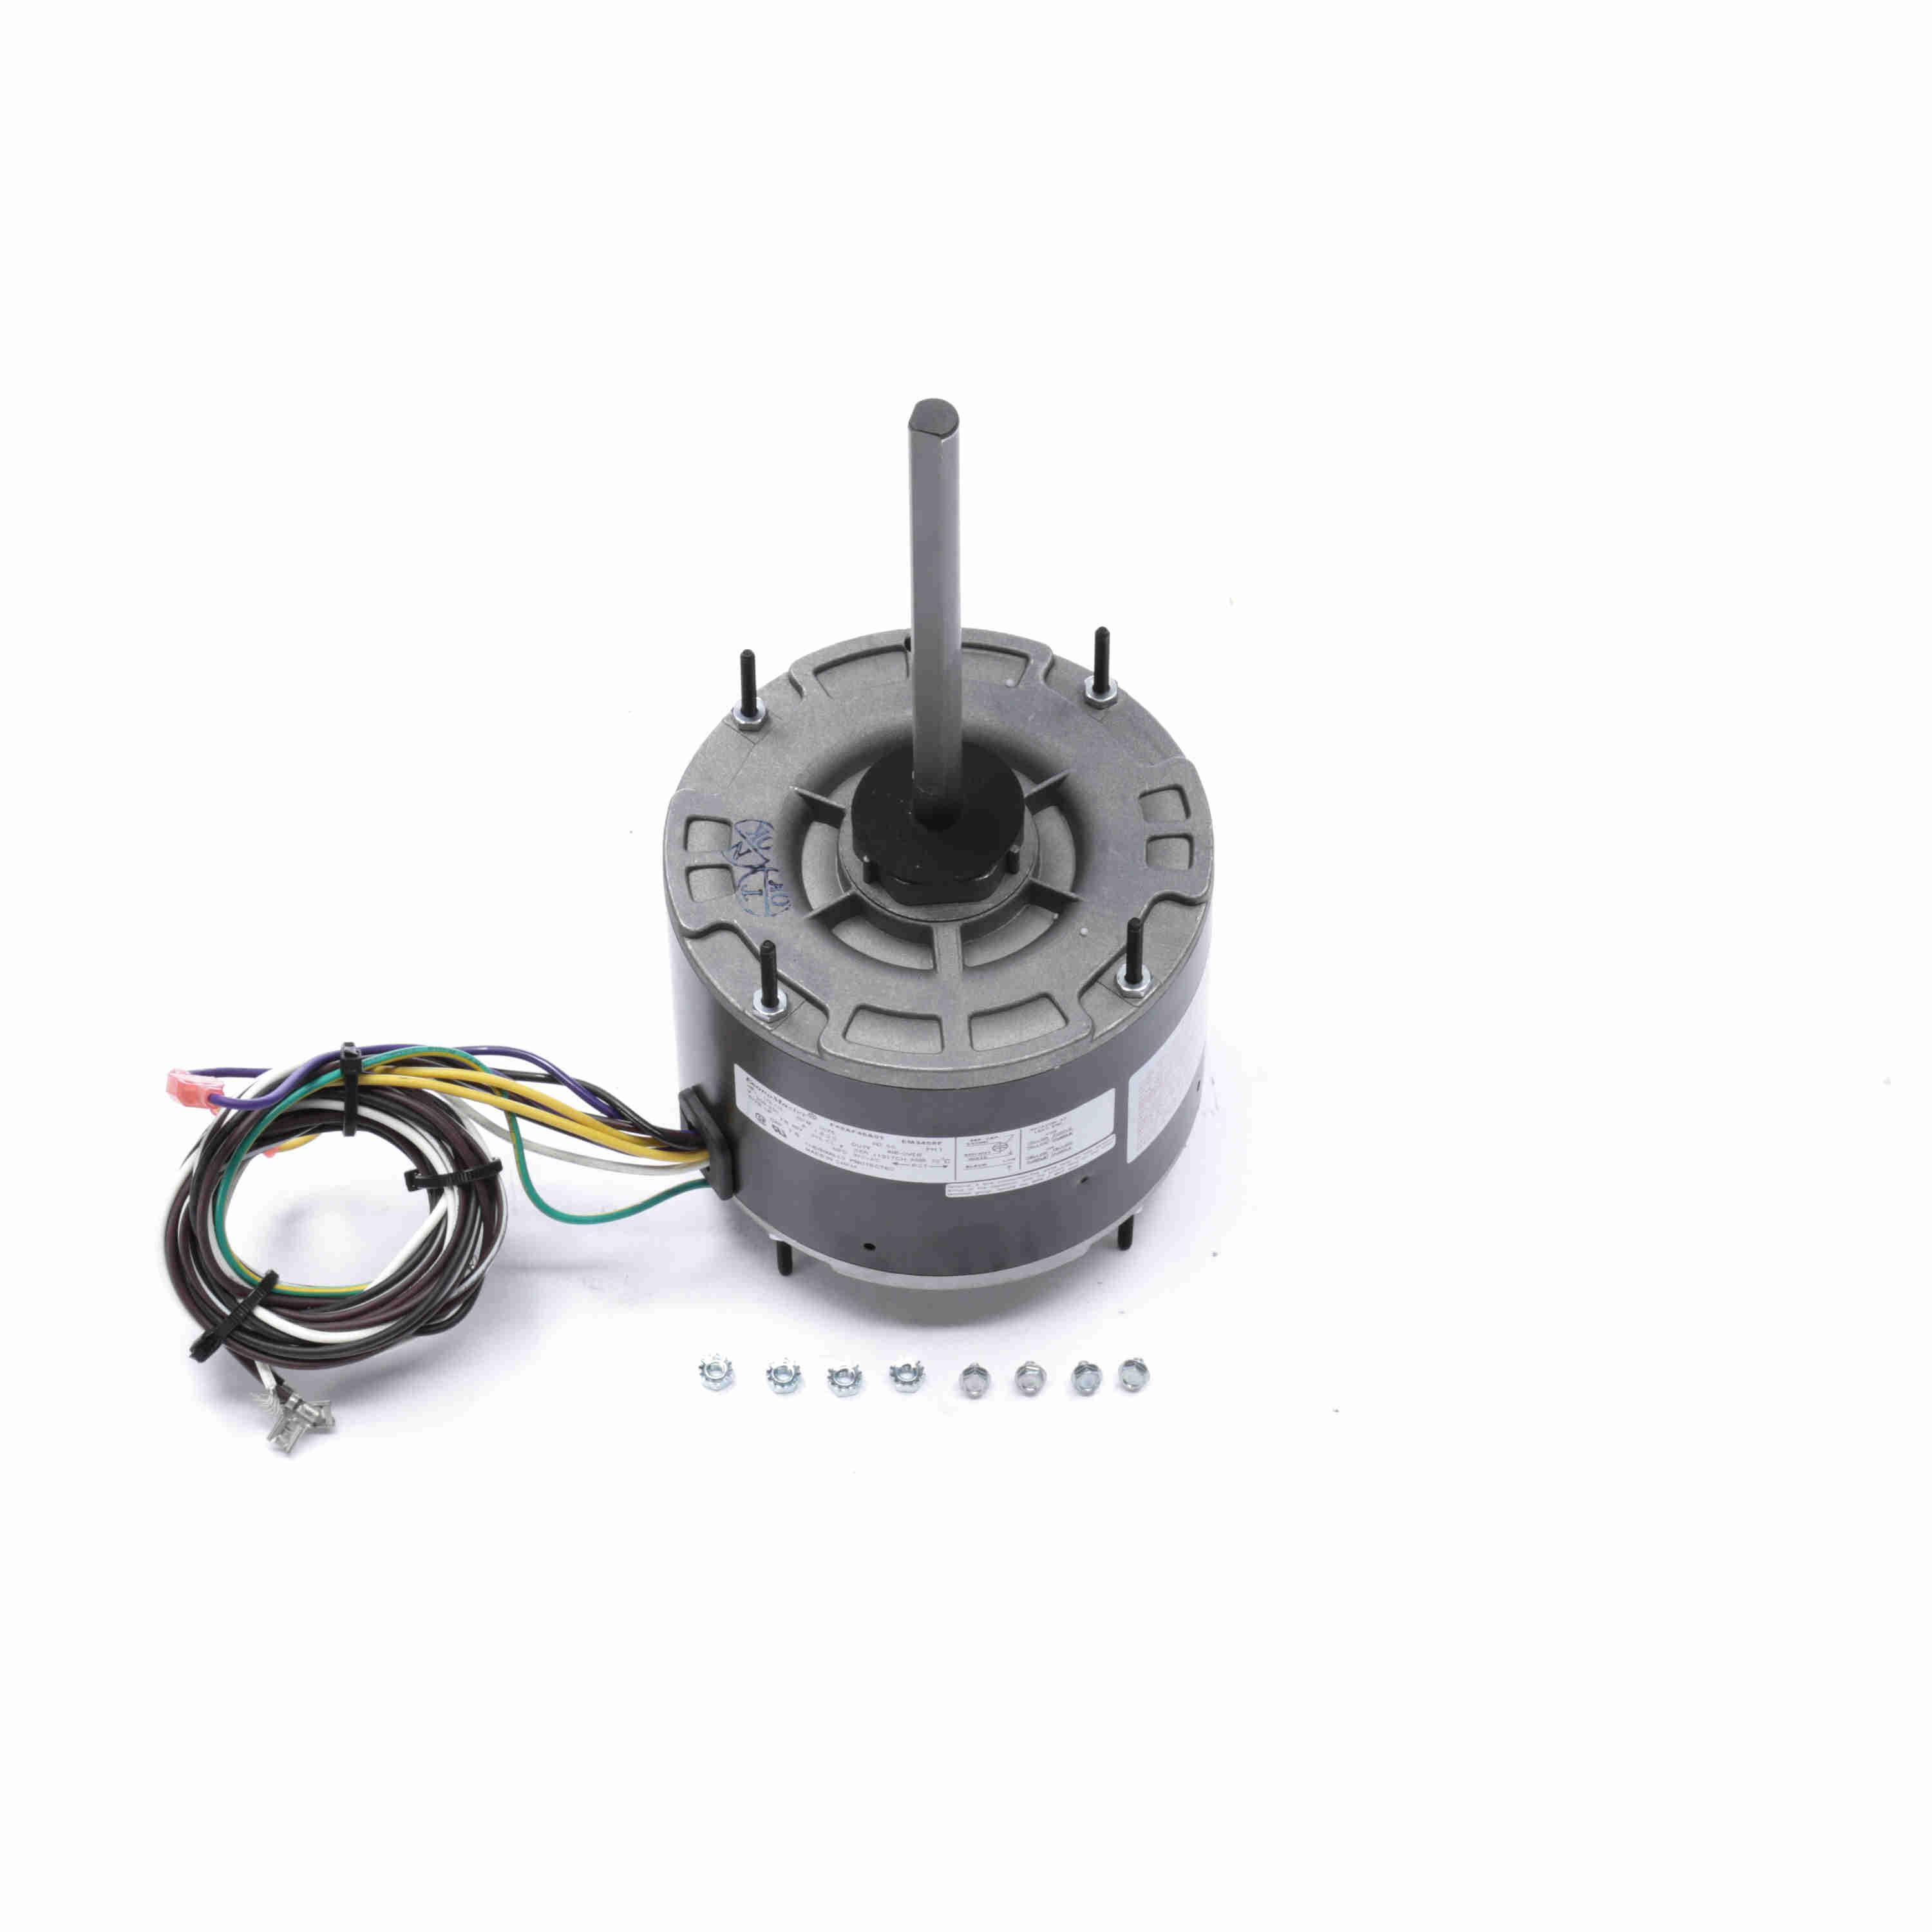 Century® EM3458F 6-Pole HVAC/R Motor, Totally Enclosed Air Over Enclosure, 1/3 to 1/6 hp, 208 to 230 V, 60 Hz, 1 Phase, 48Y Frame, 1075 rpm Speed, Extended Stud Mount